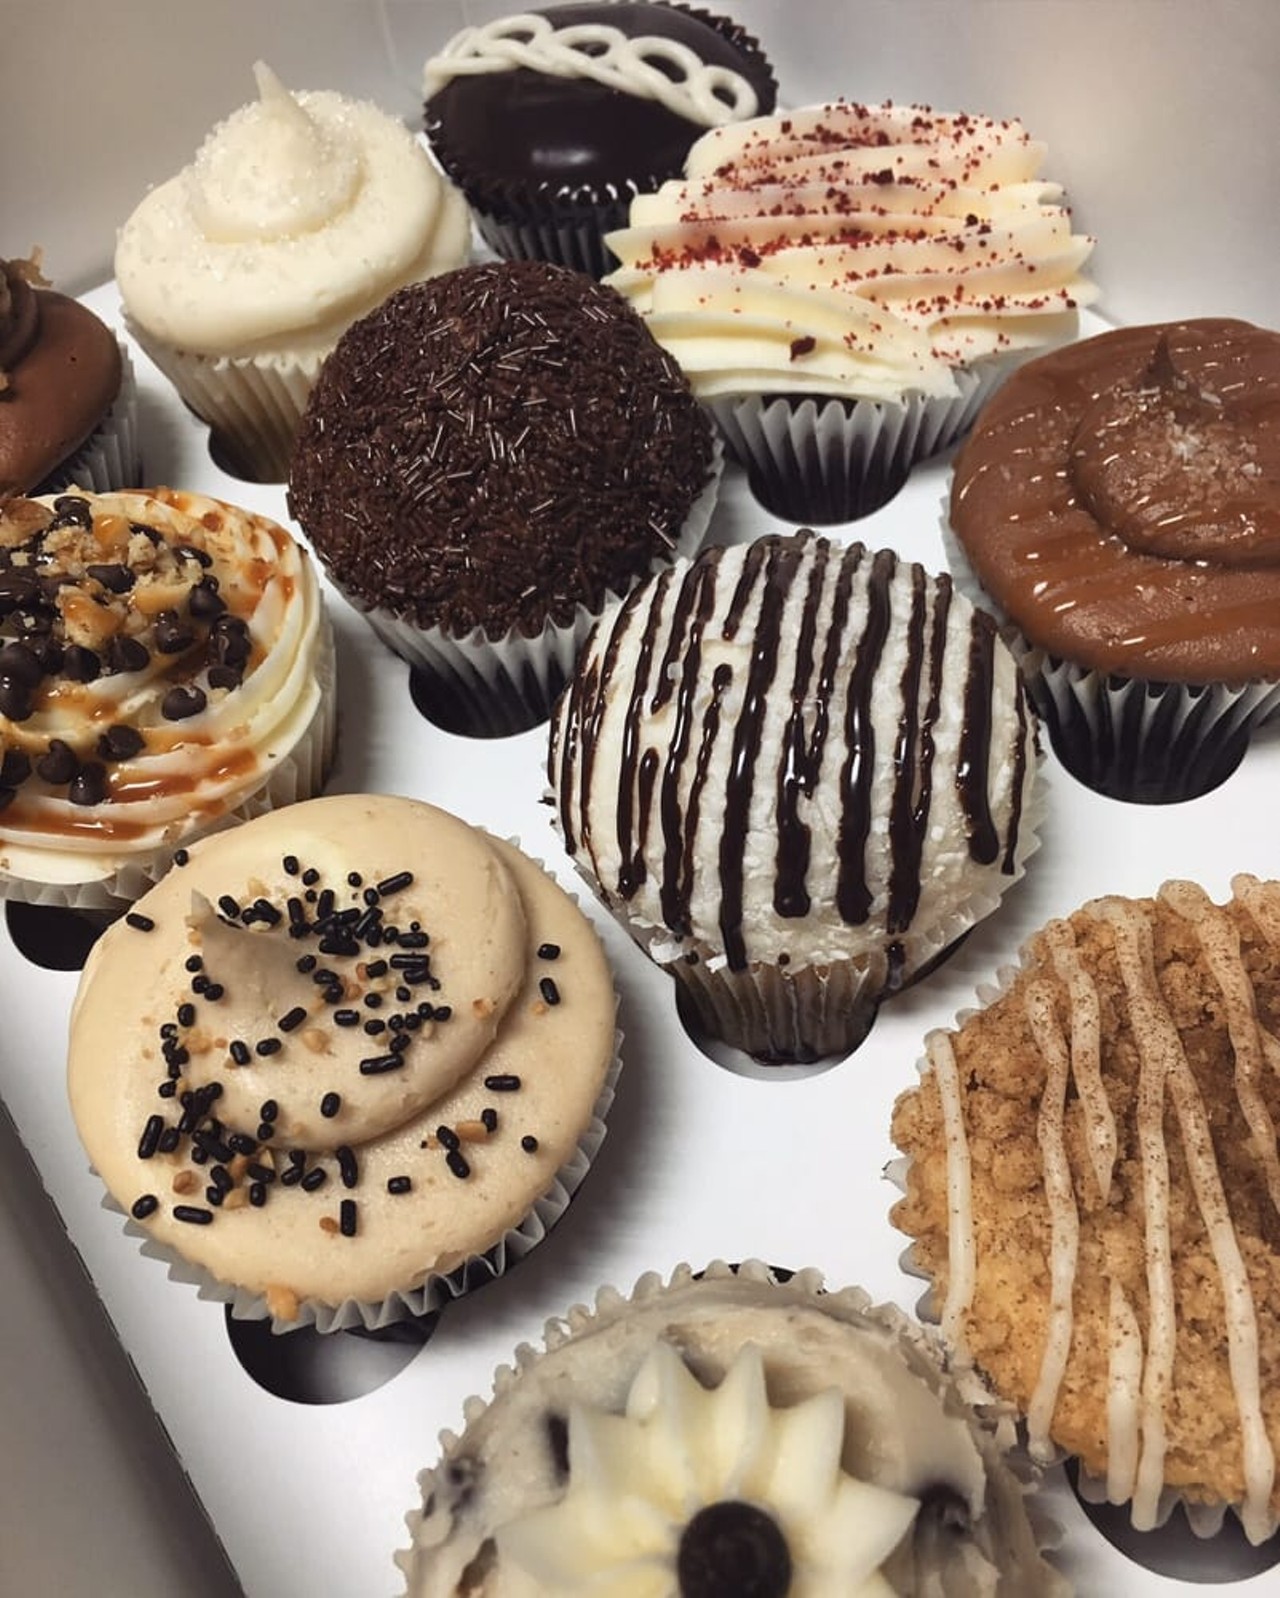 Yummy Cupcakes
With a salted pretzel cupcake and a bazarre but delicious cupcake in a jar, this place is definetly a go to for a yummy cupcake 
39566 Woodward Ave
Bloomfield Hills
(248) 494-4644